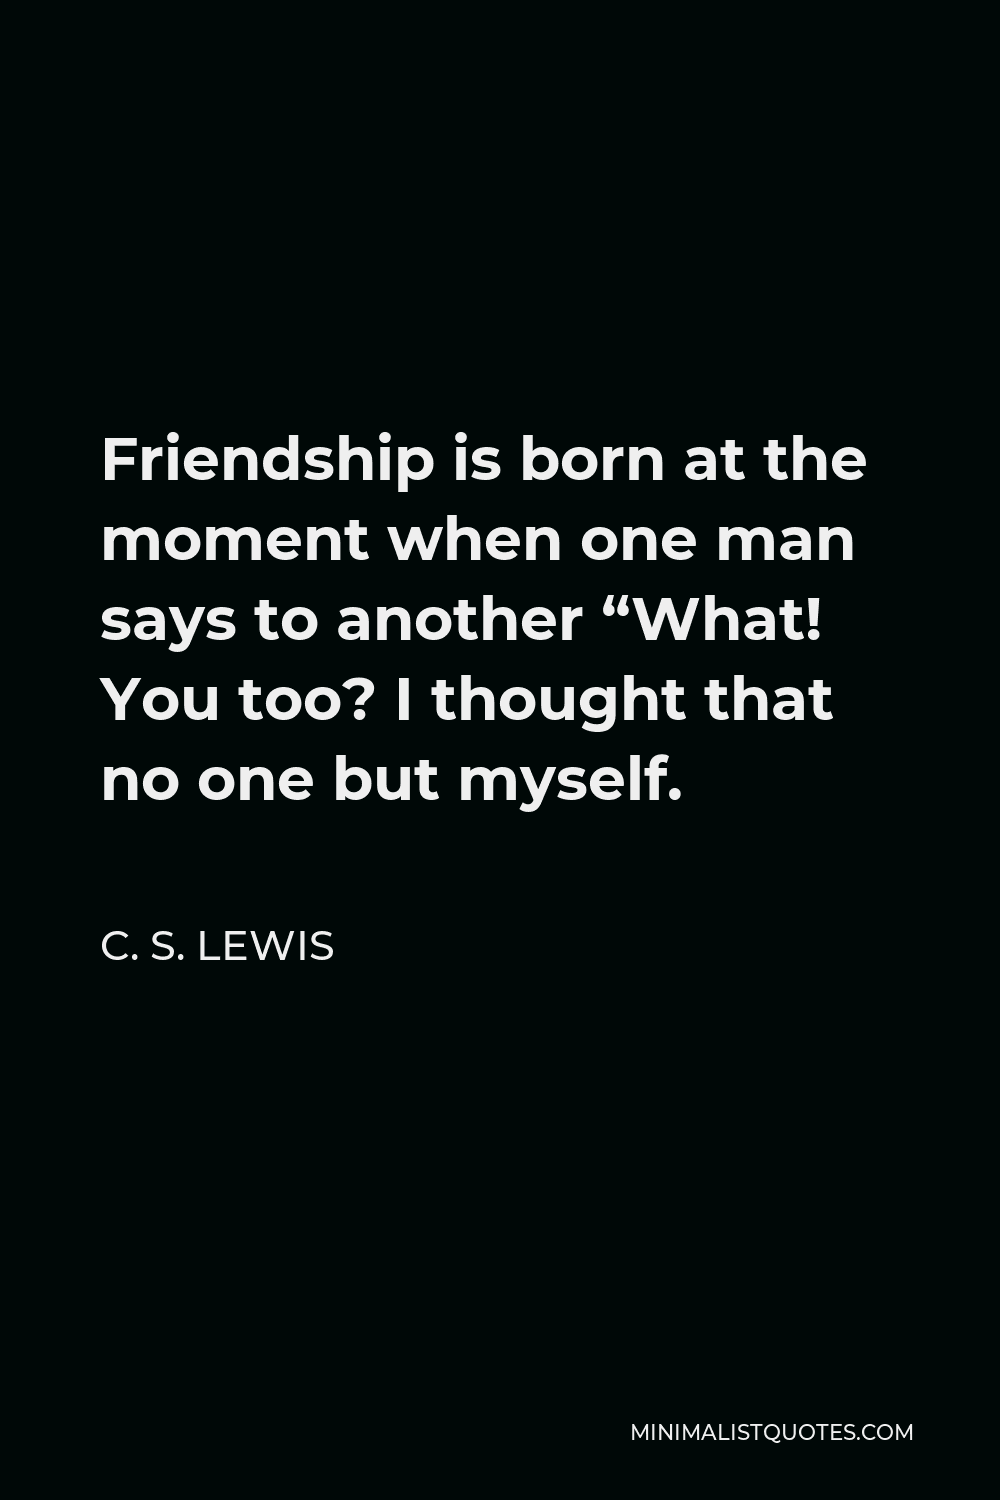 Lewis Quote Greeting Card What Friendship C.S you too? I thought I was the only one SALE